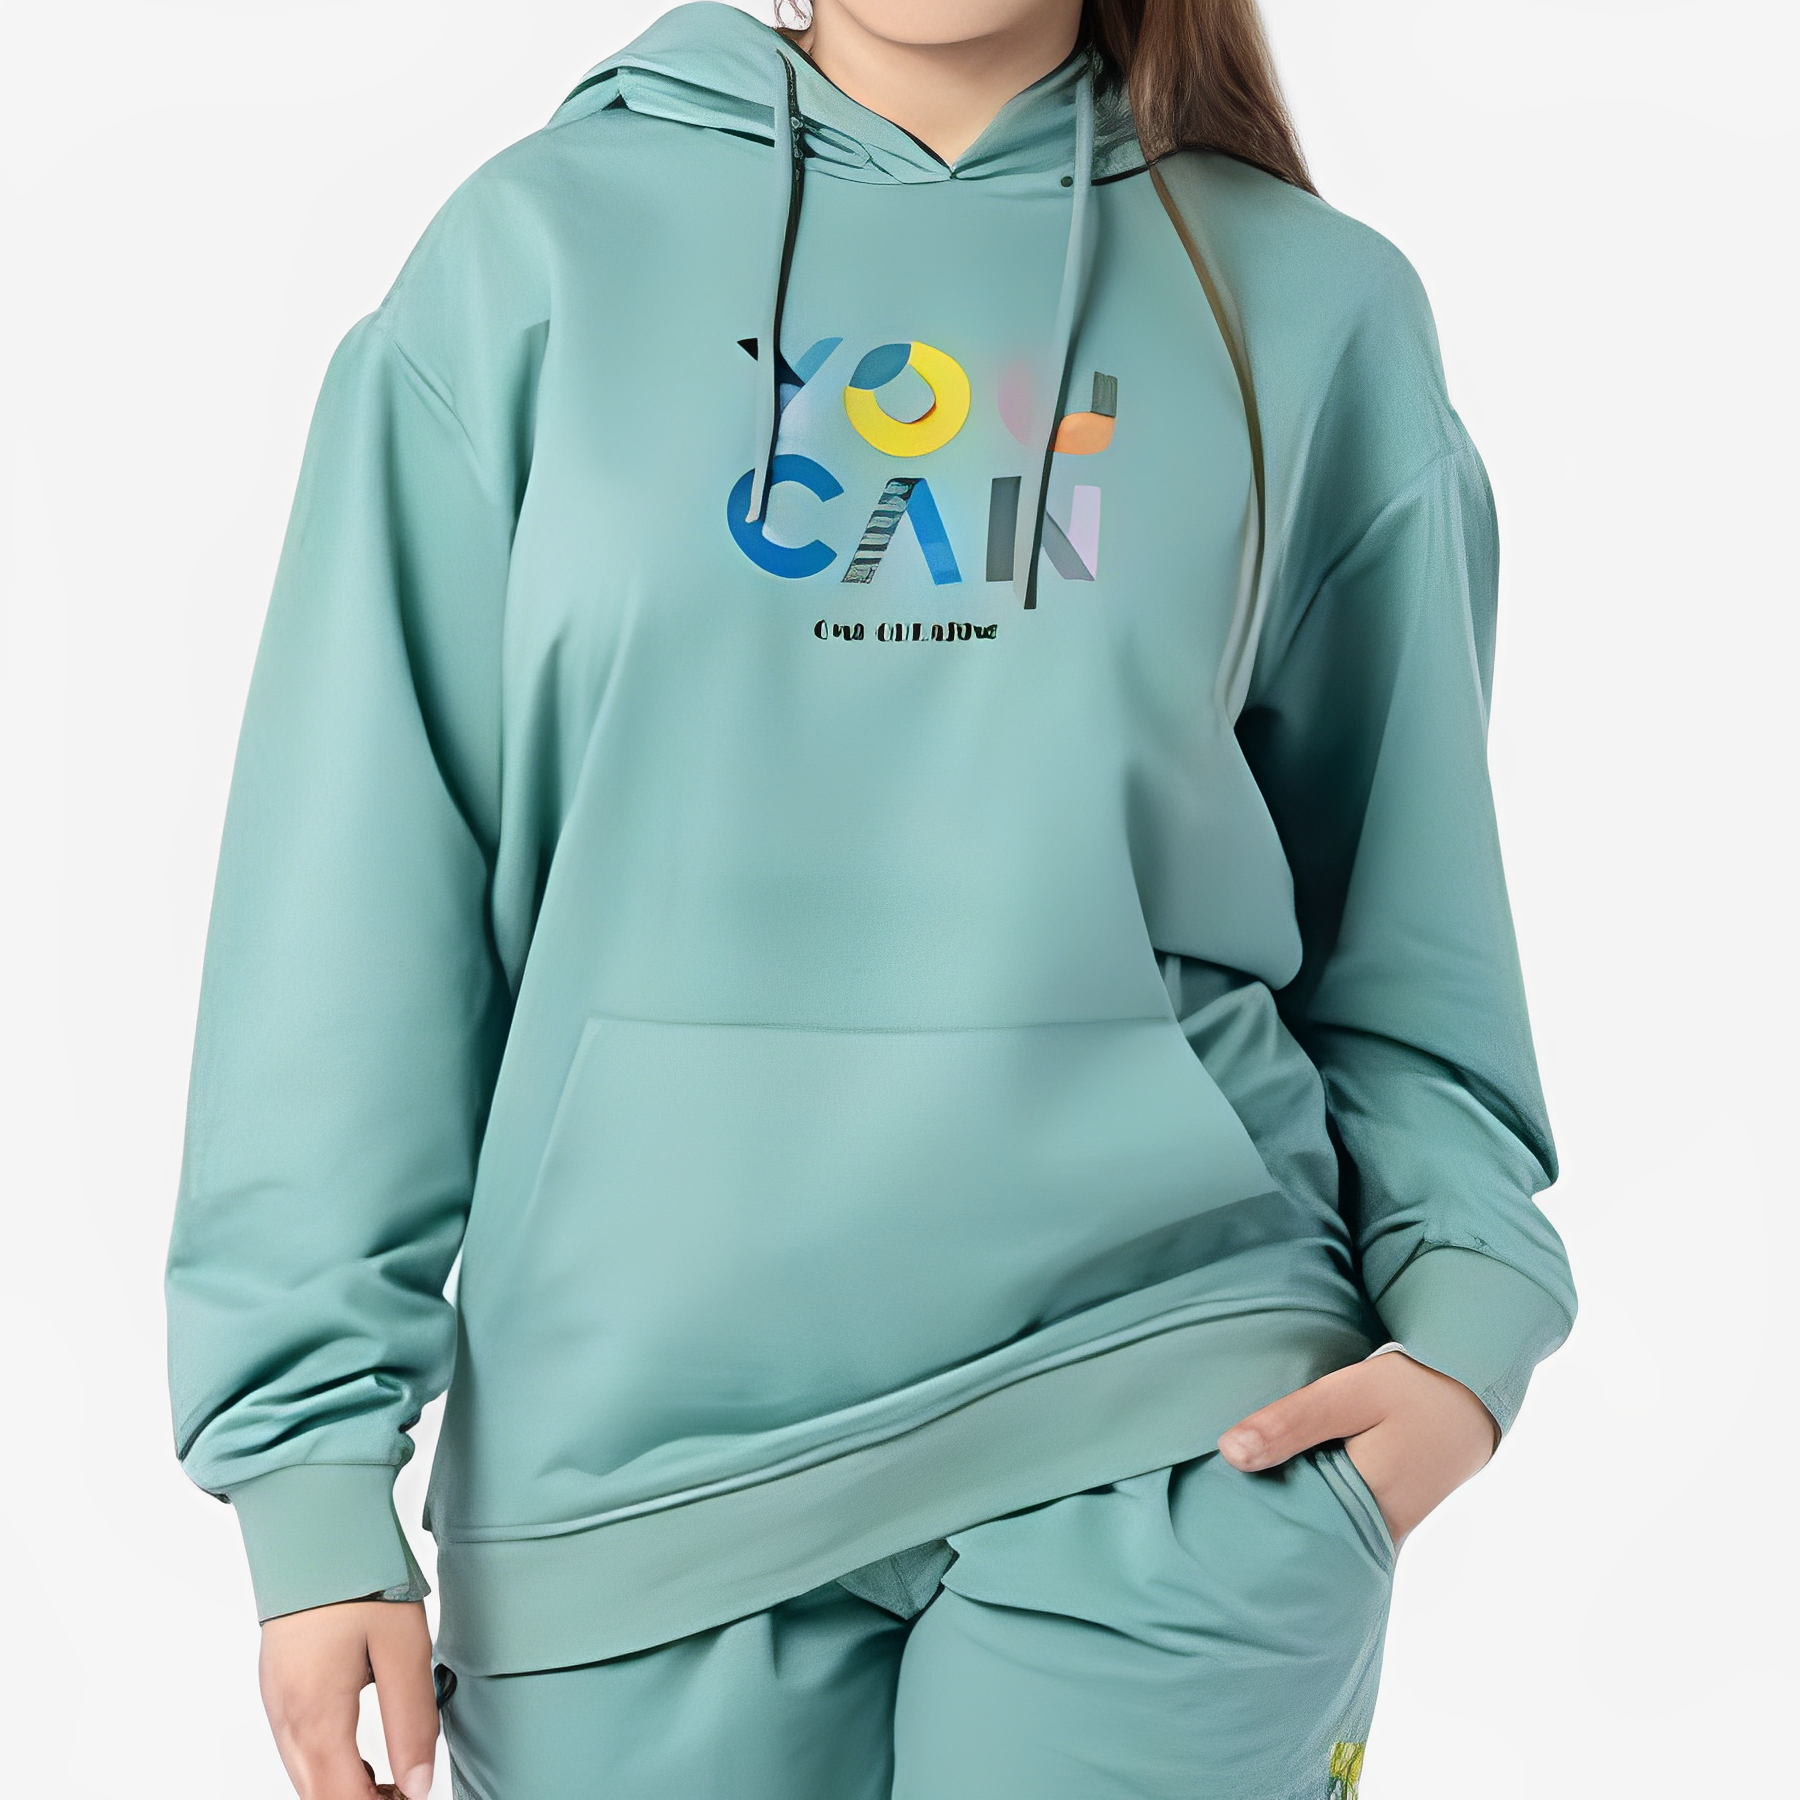 You Can! Girls Casual Set